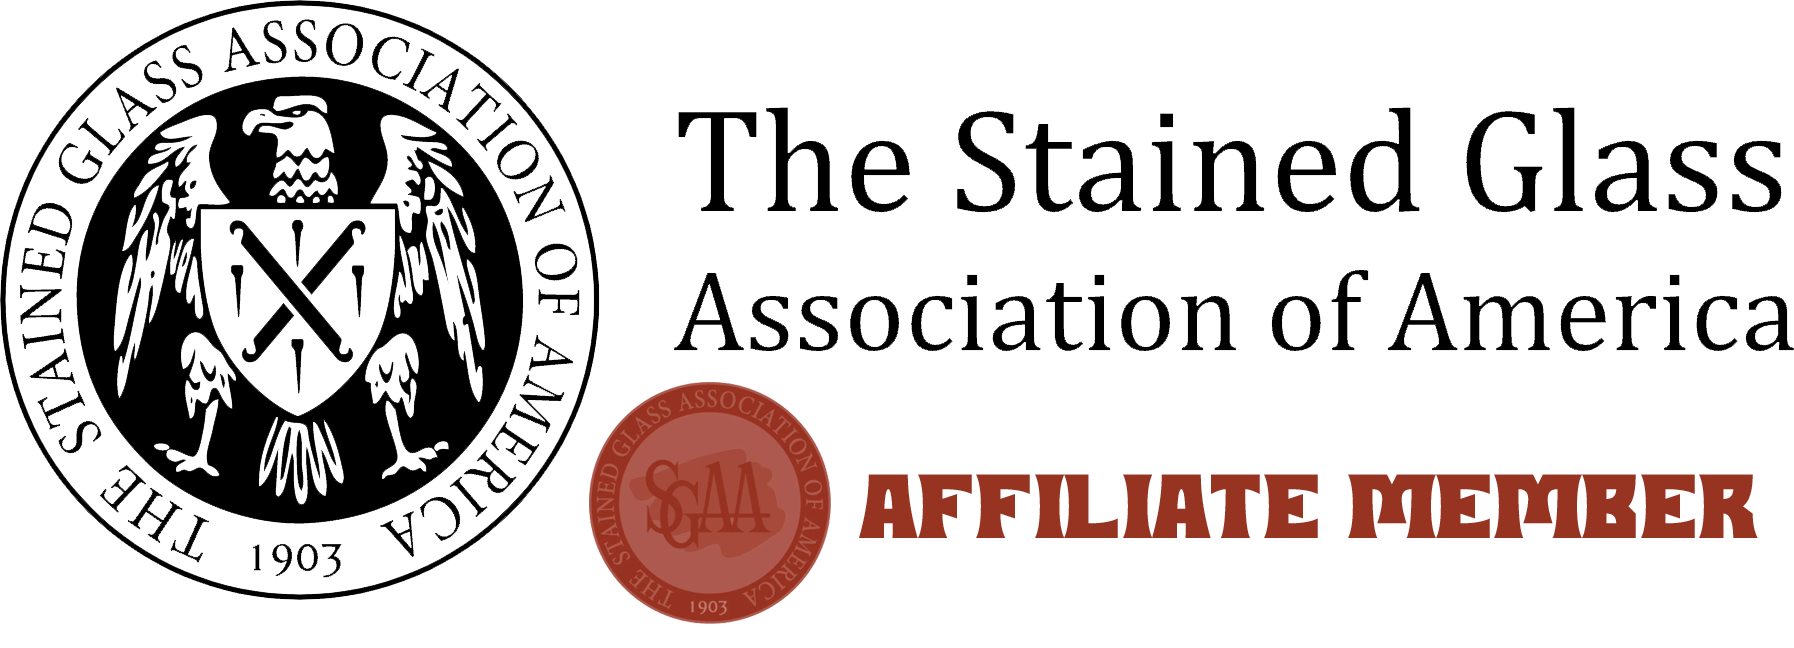 The Stained Glass Association of America logo. Murdock is an Affiliate Member of the SGAA.